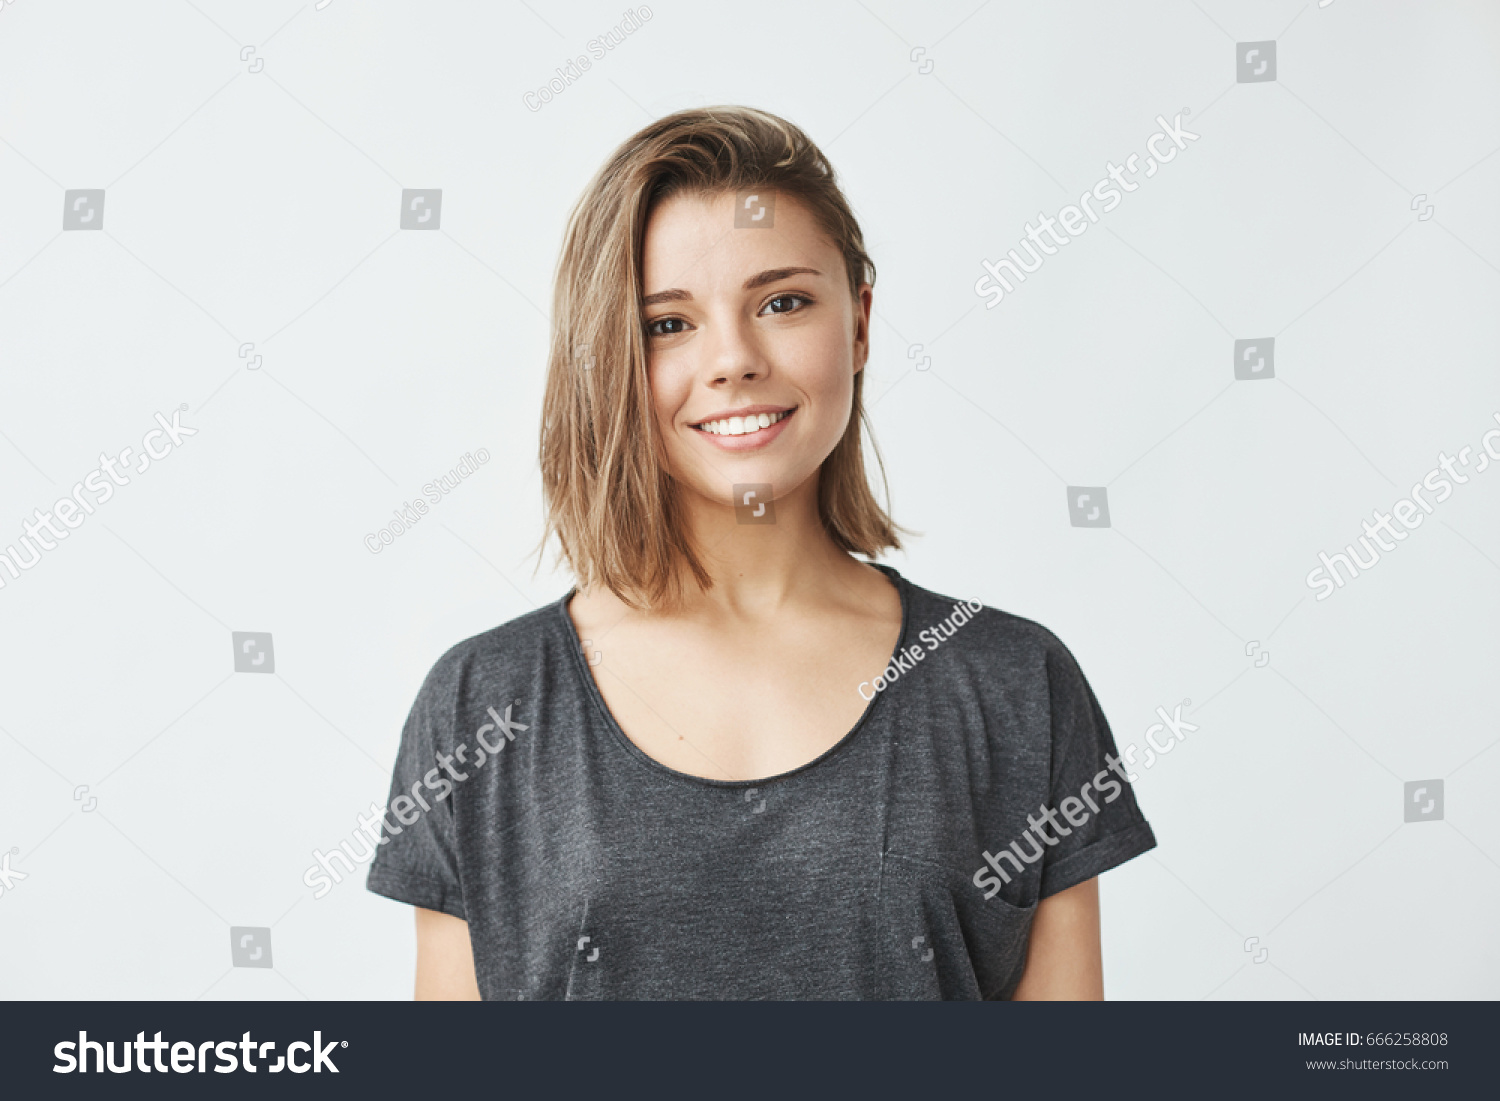 Portrait of young beautiful cute cheerful girl smiling looking at camera over white background. #666258808